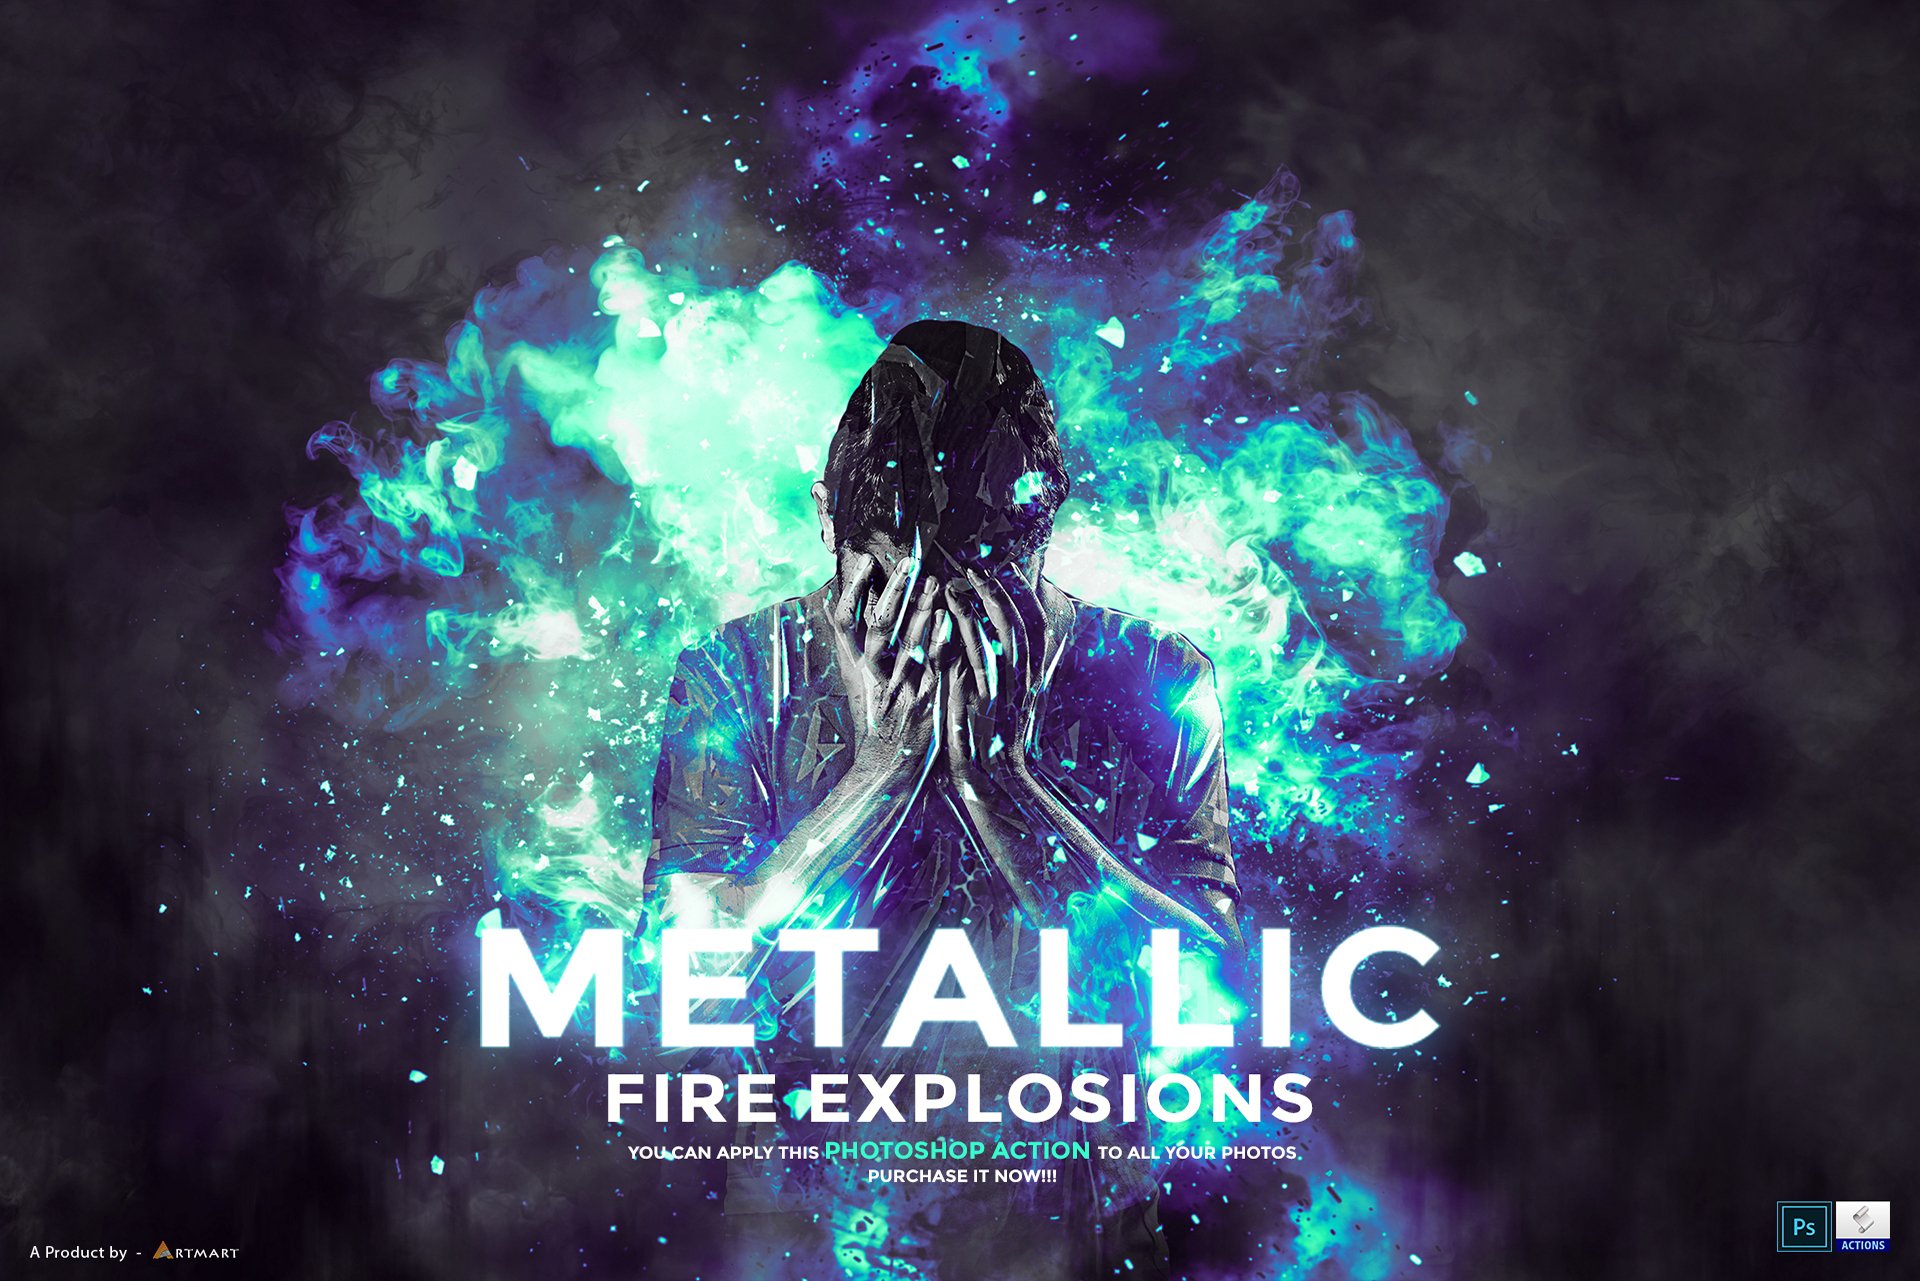 03 metallic fire explosion ps action 28129 967